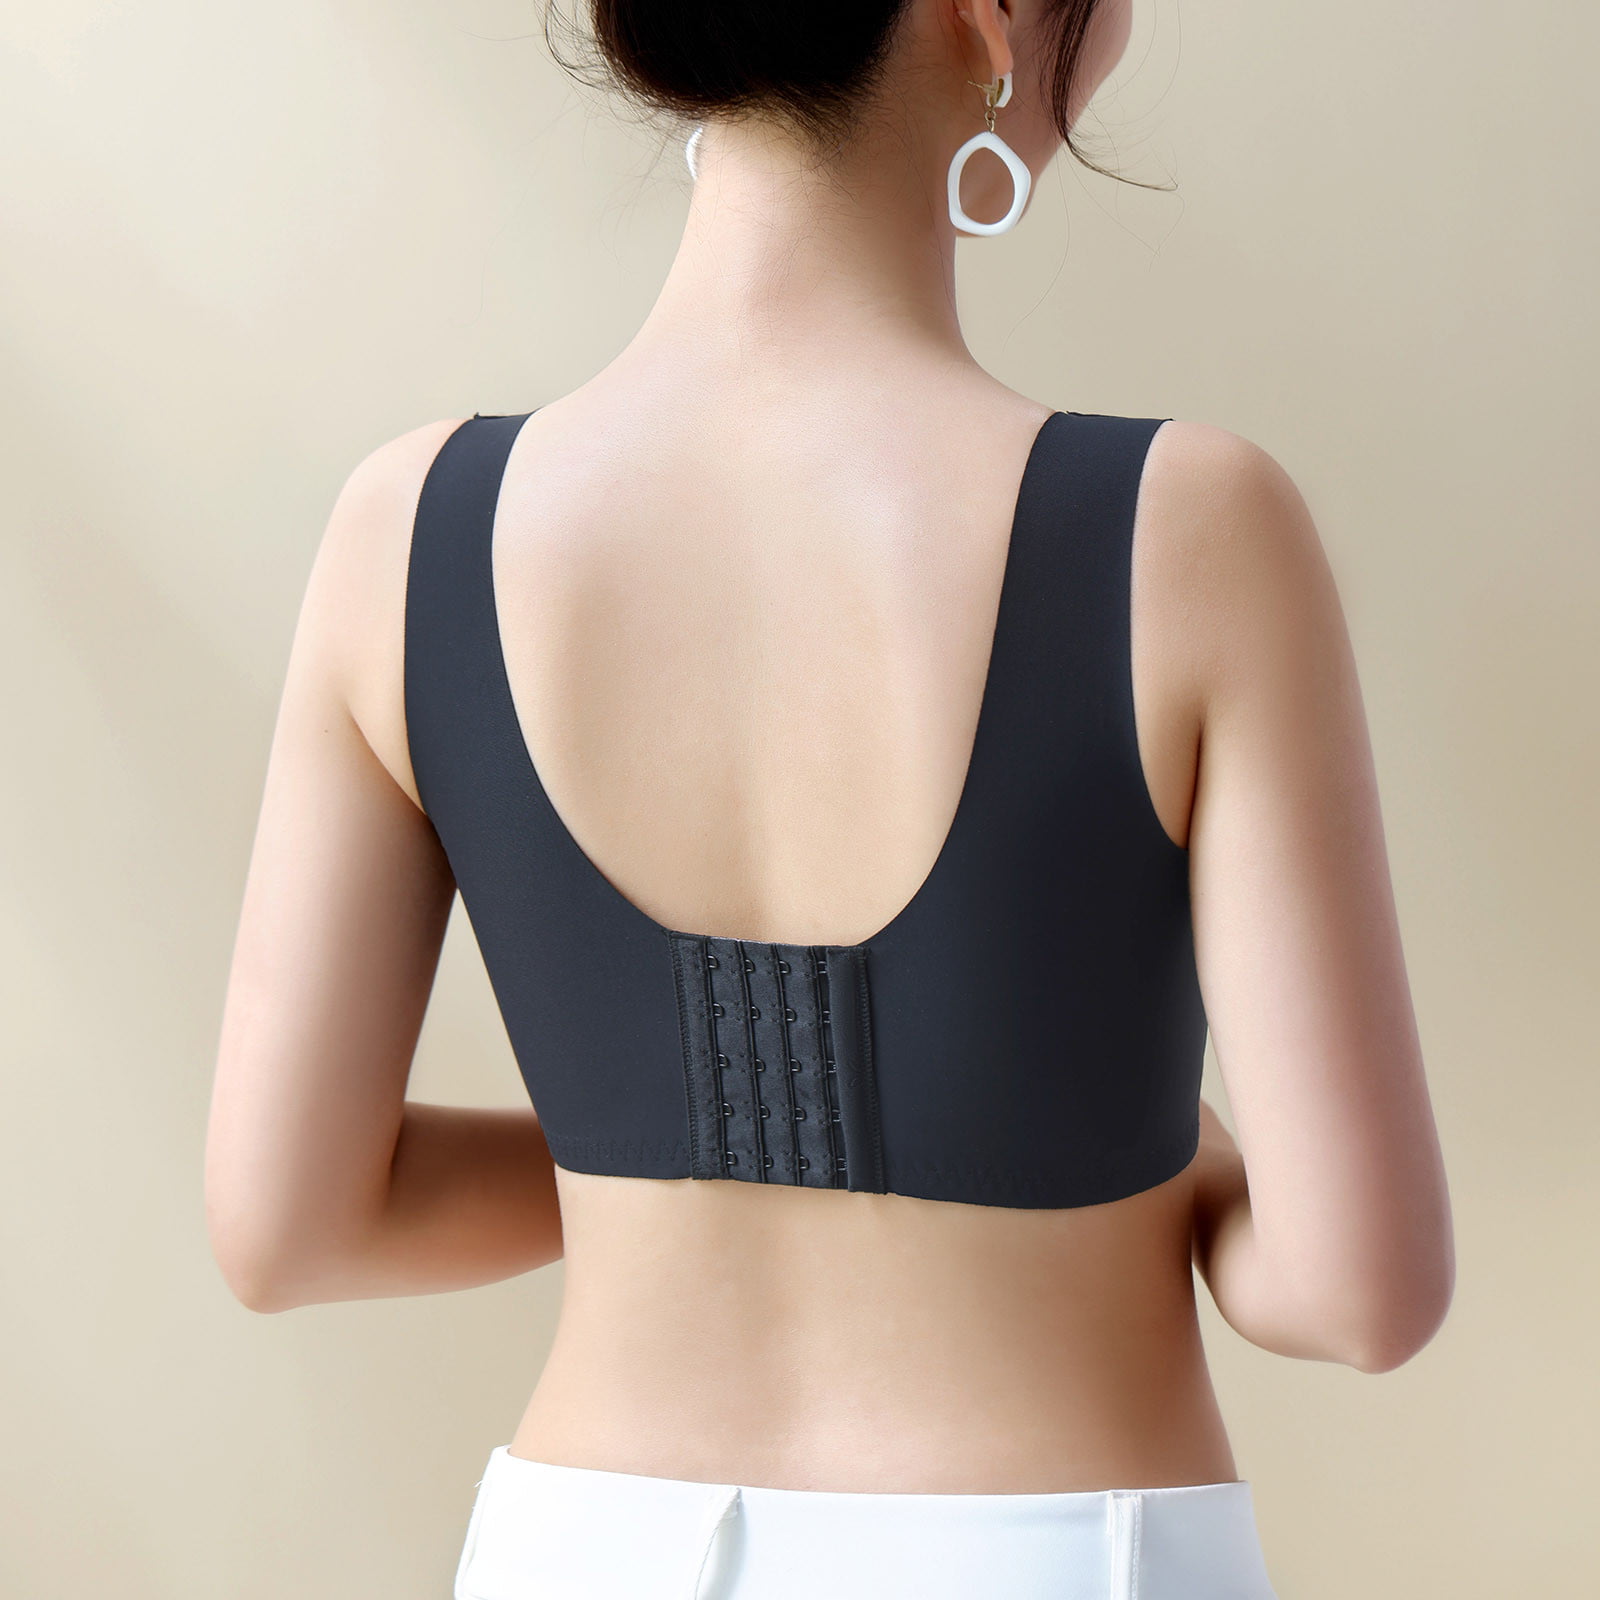 Breathable Seamless Push Up Maternity Sports Bra For Women LJ201204 From  Cong00, $12.47